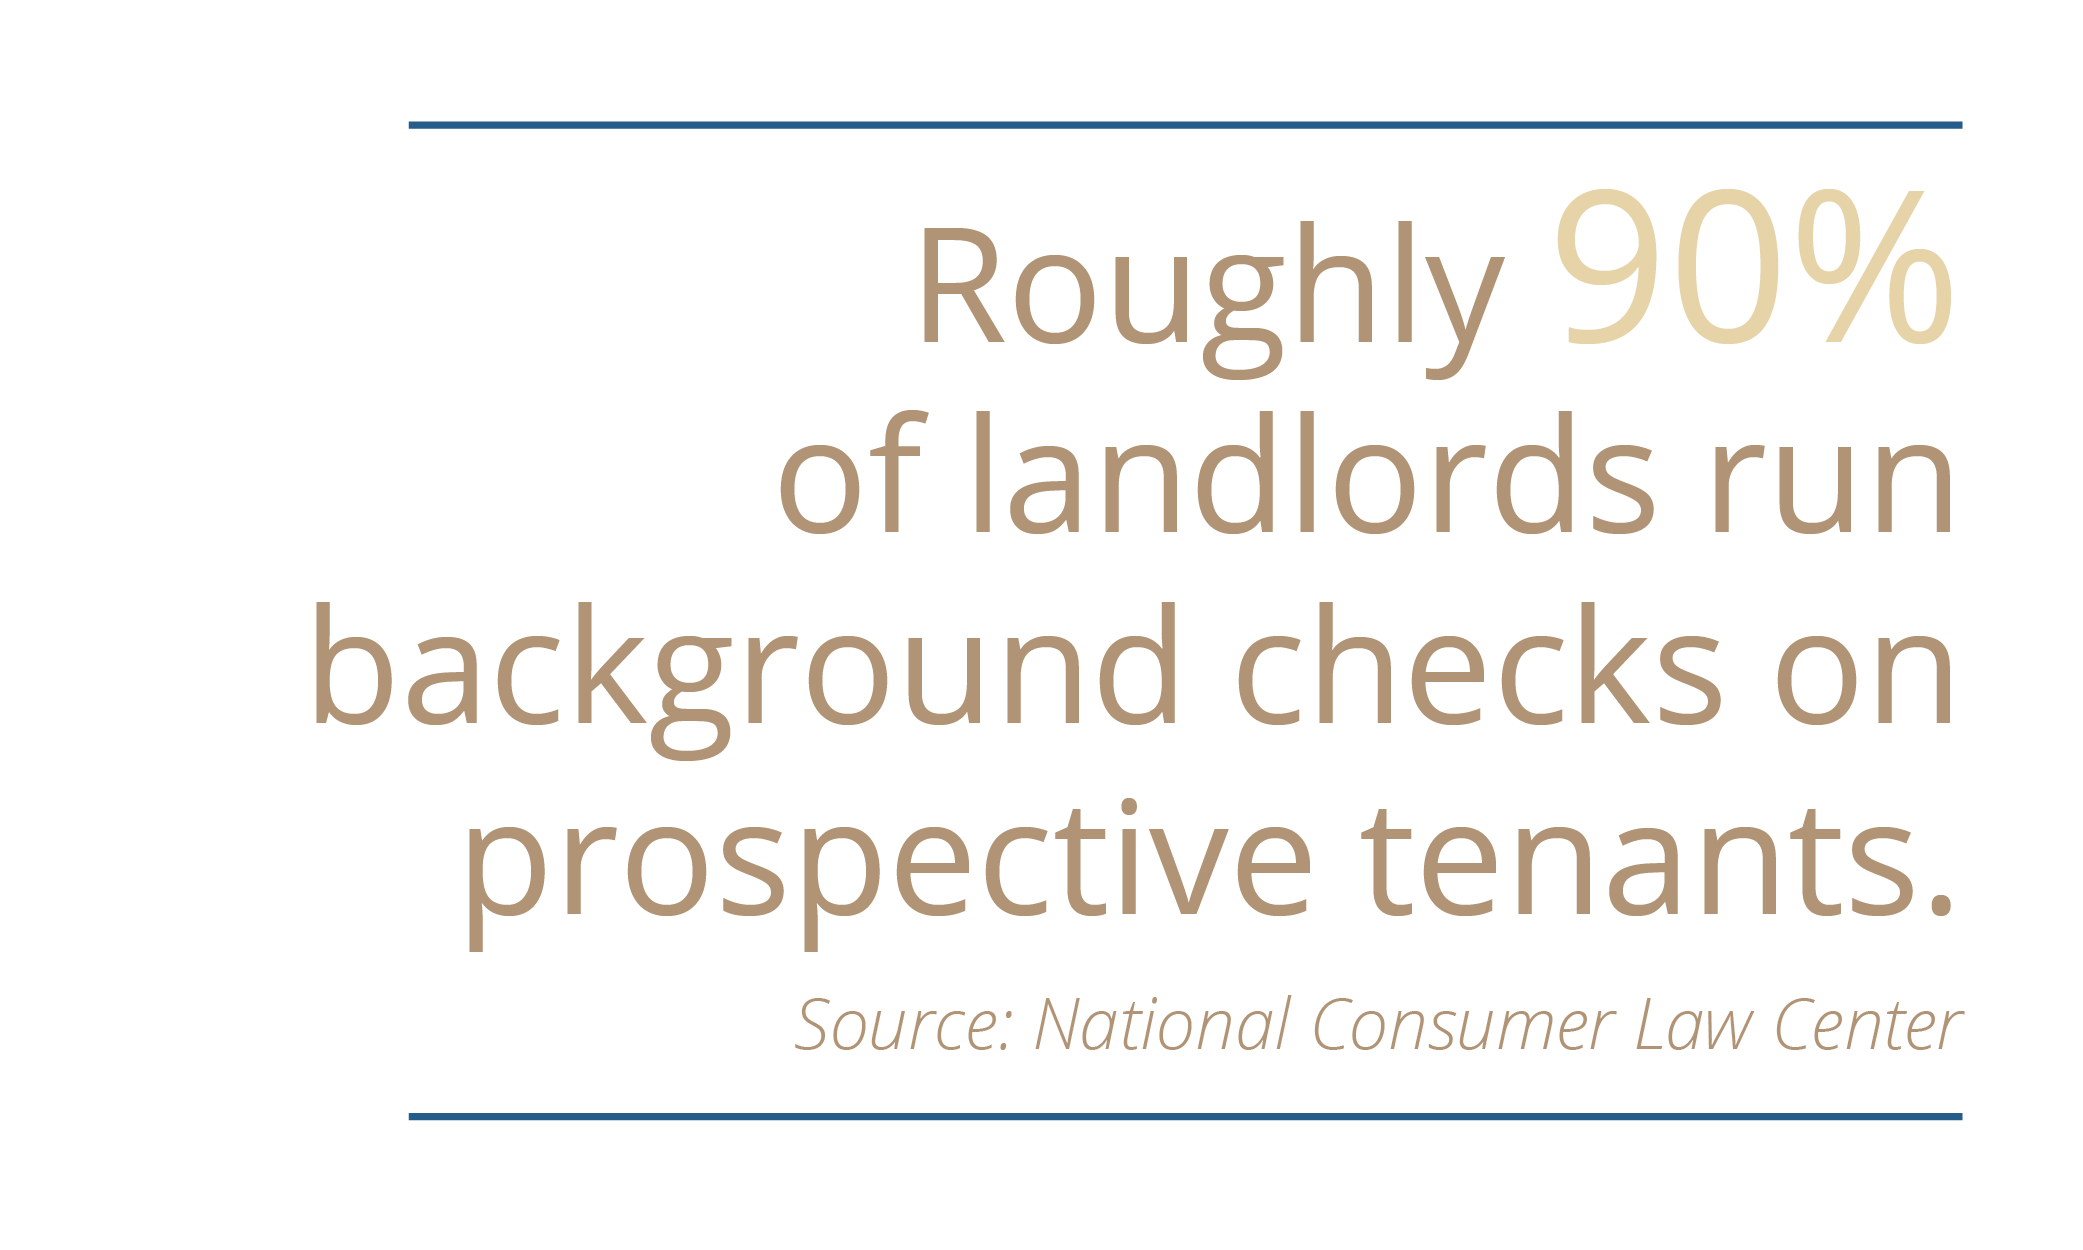 National Consumer Law Center infographic that reads: 'Roughly 90% of landlords run background checks on prospective tenants.'